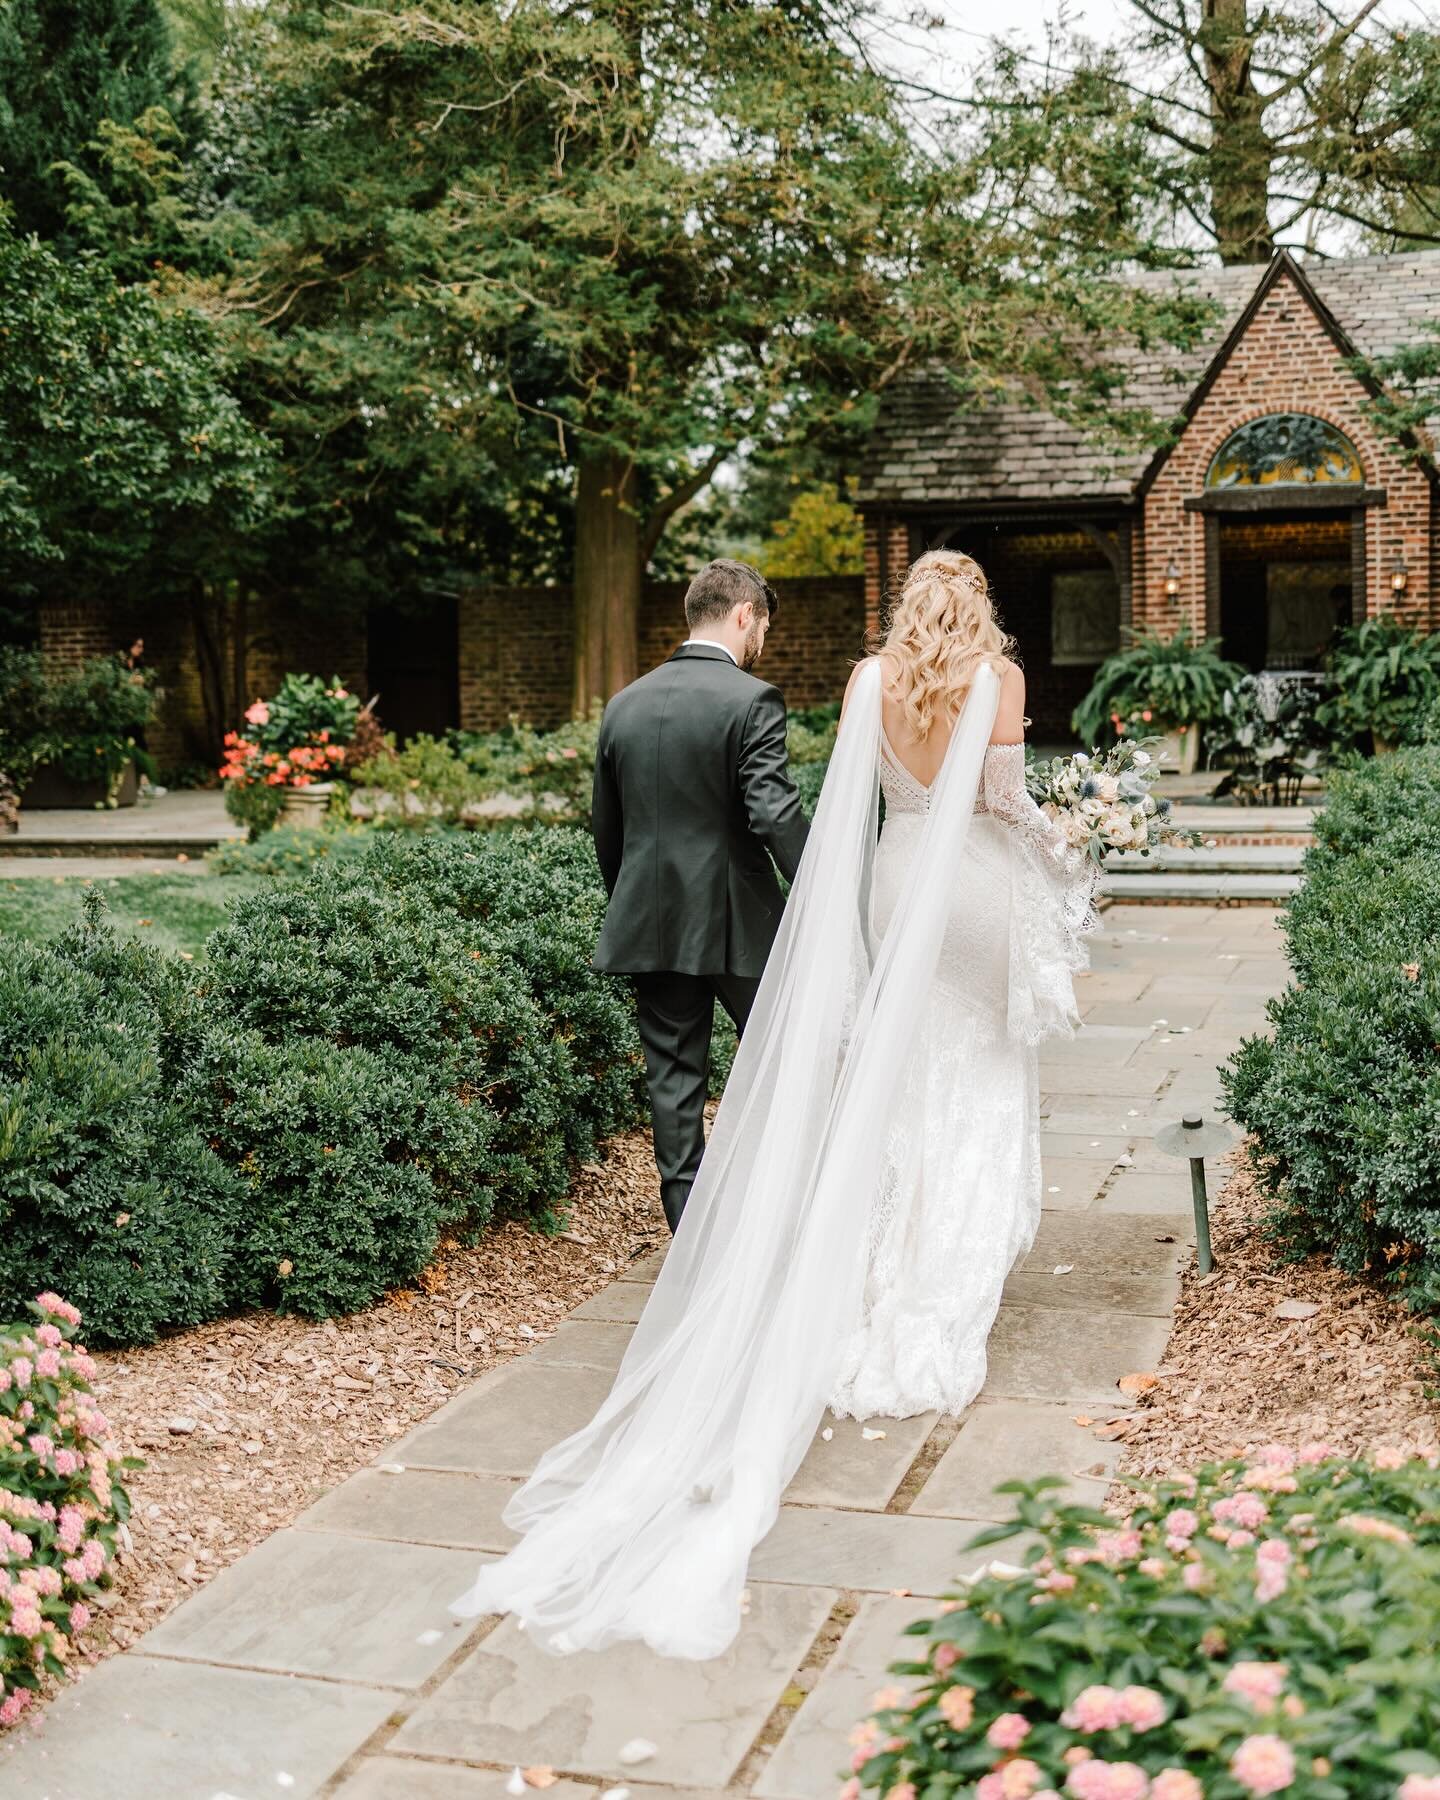 New to the blog today - Brittany &amp; Joe&rsquo;s enchanting bohemian-inspired wedding at the Greenville County Club!